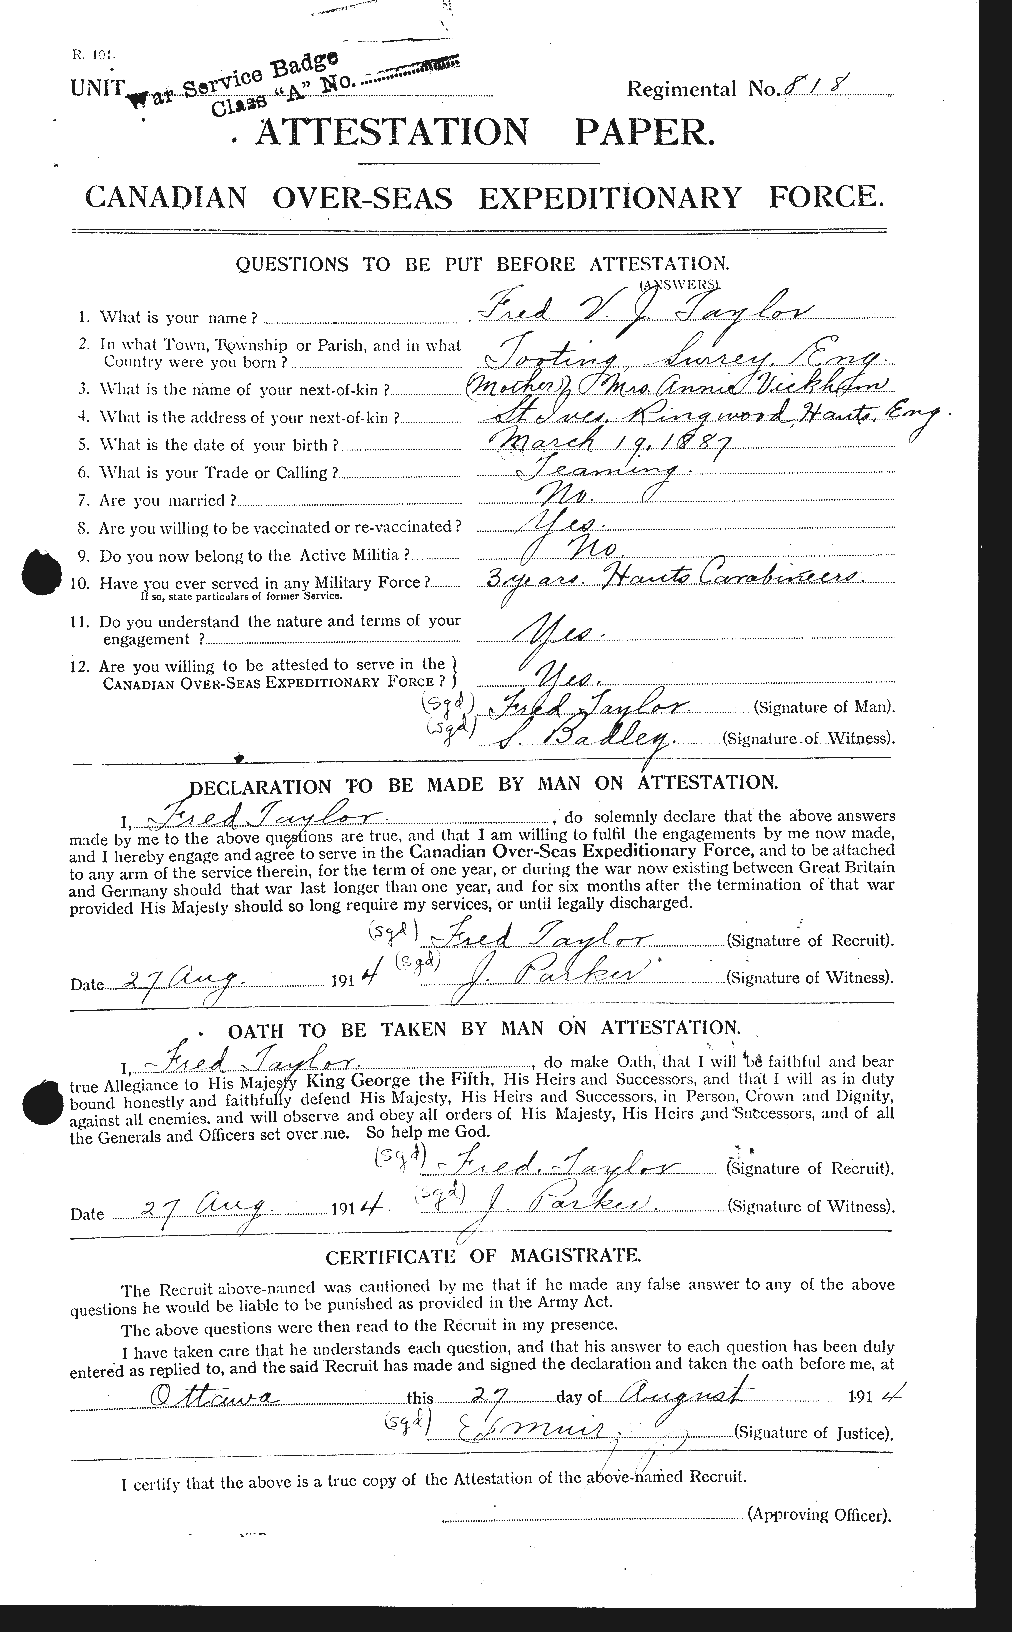 Personnel Records of the First World War - CEF 625757a